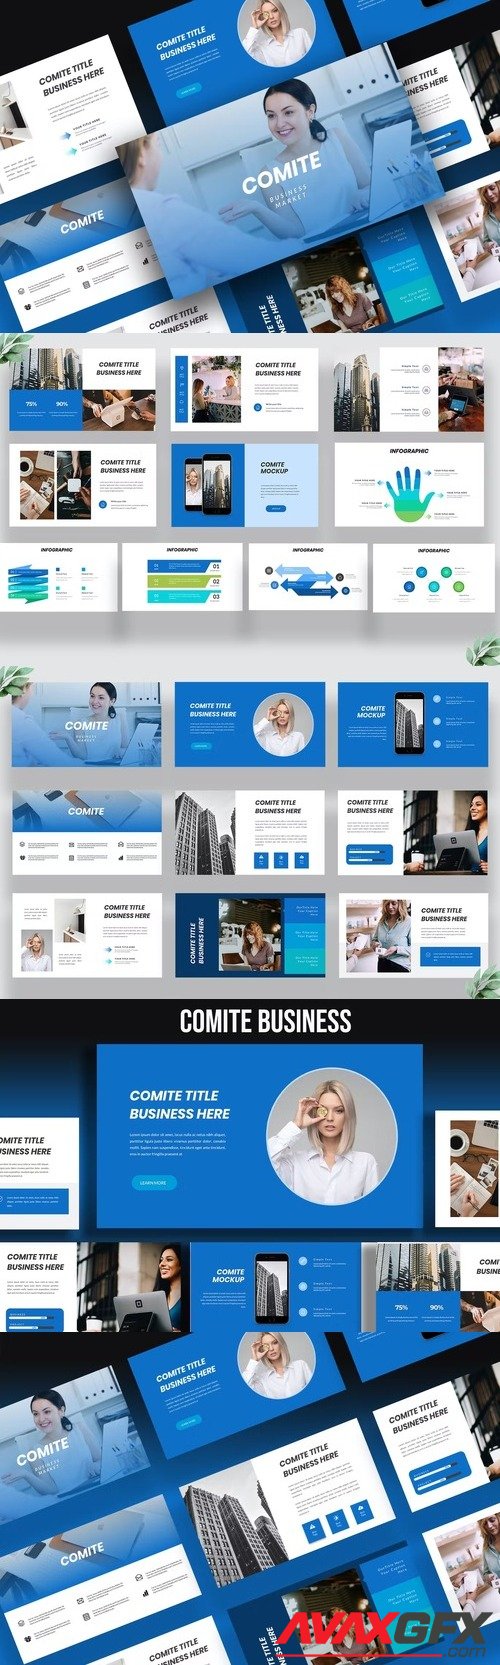 Comite Business Powerpoint SUS4A3L